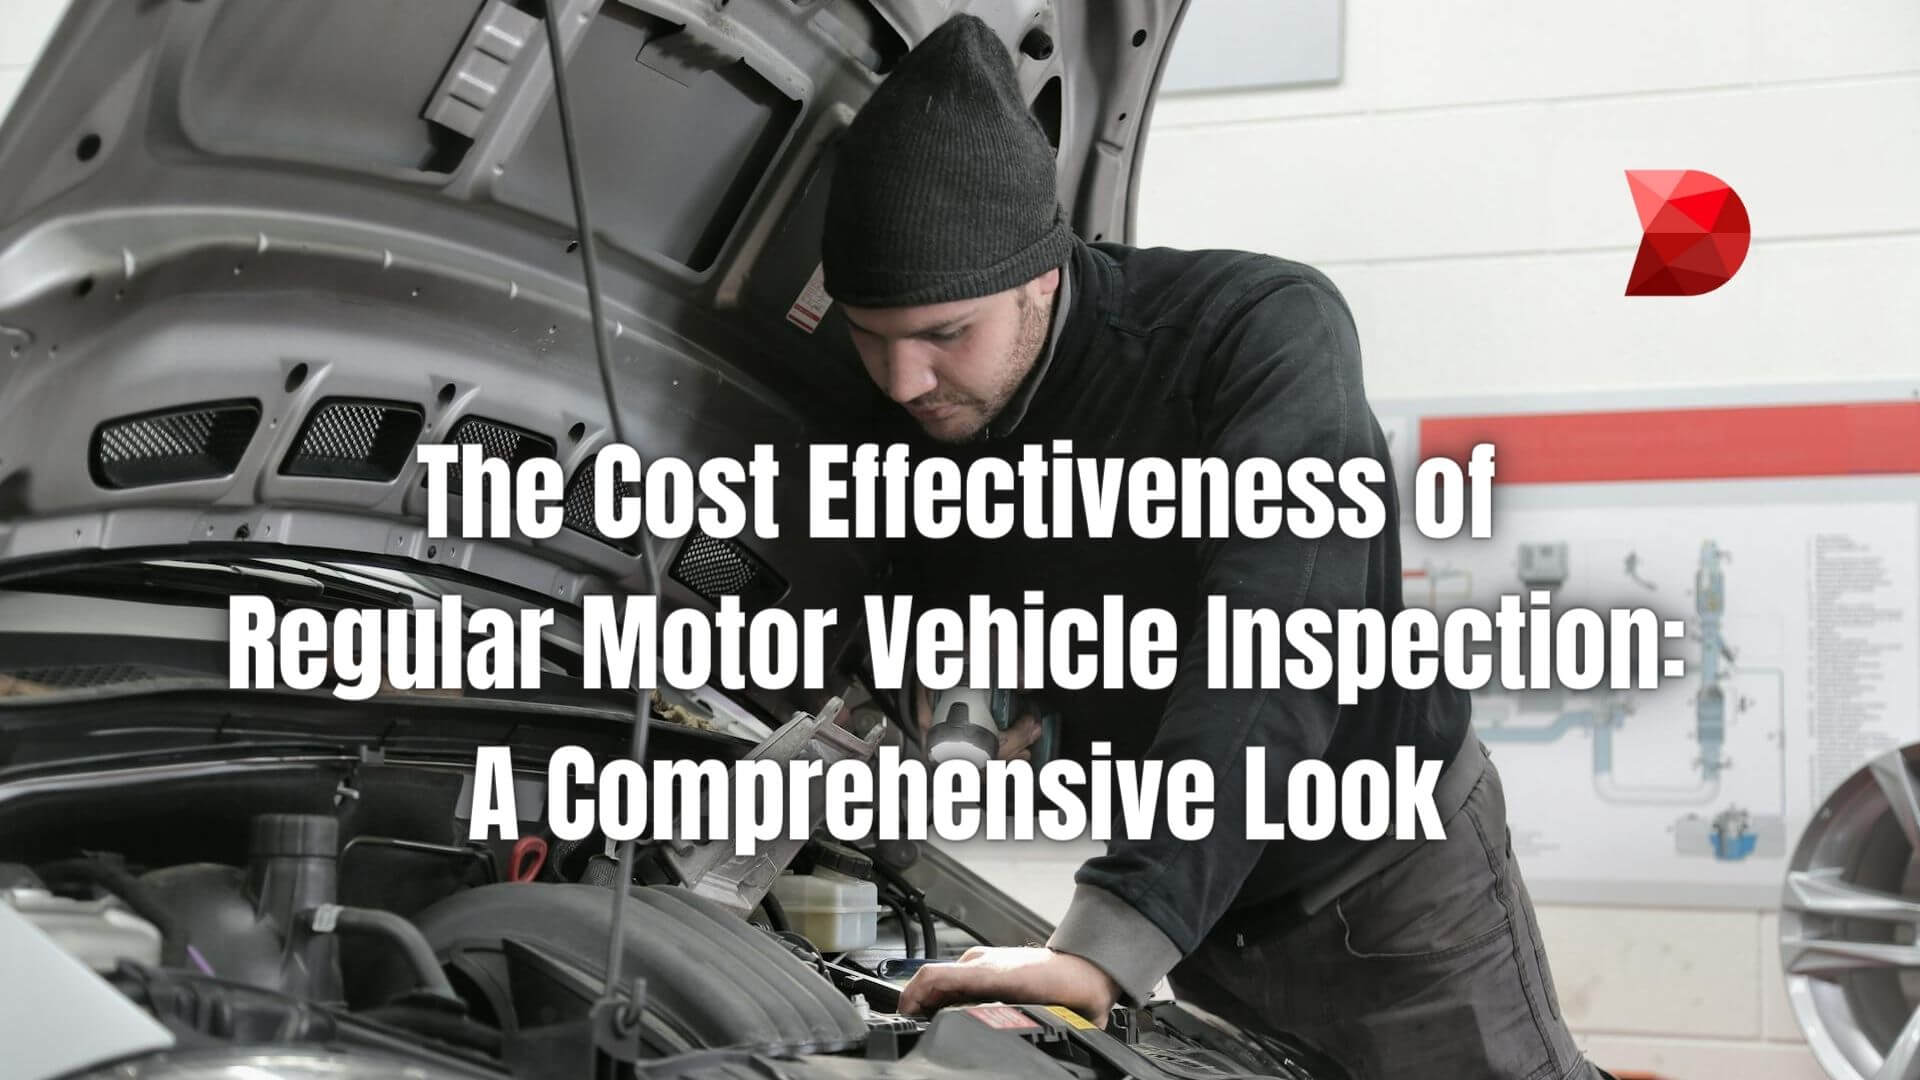 Make informed decisions about vehicle maintenance costs. Click here to explore the cost-effectiveness of regular motor vehicle inspections.